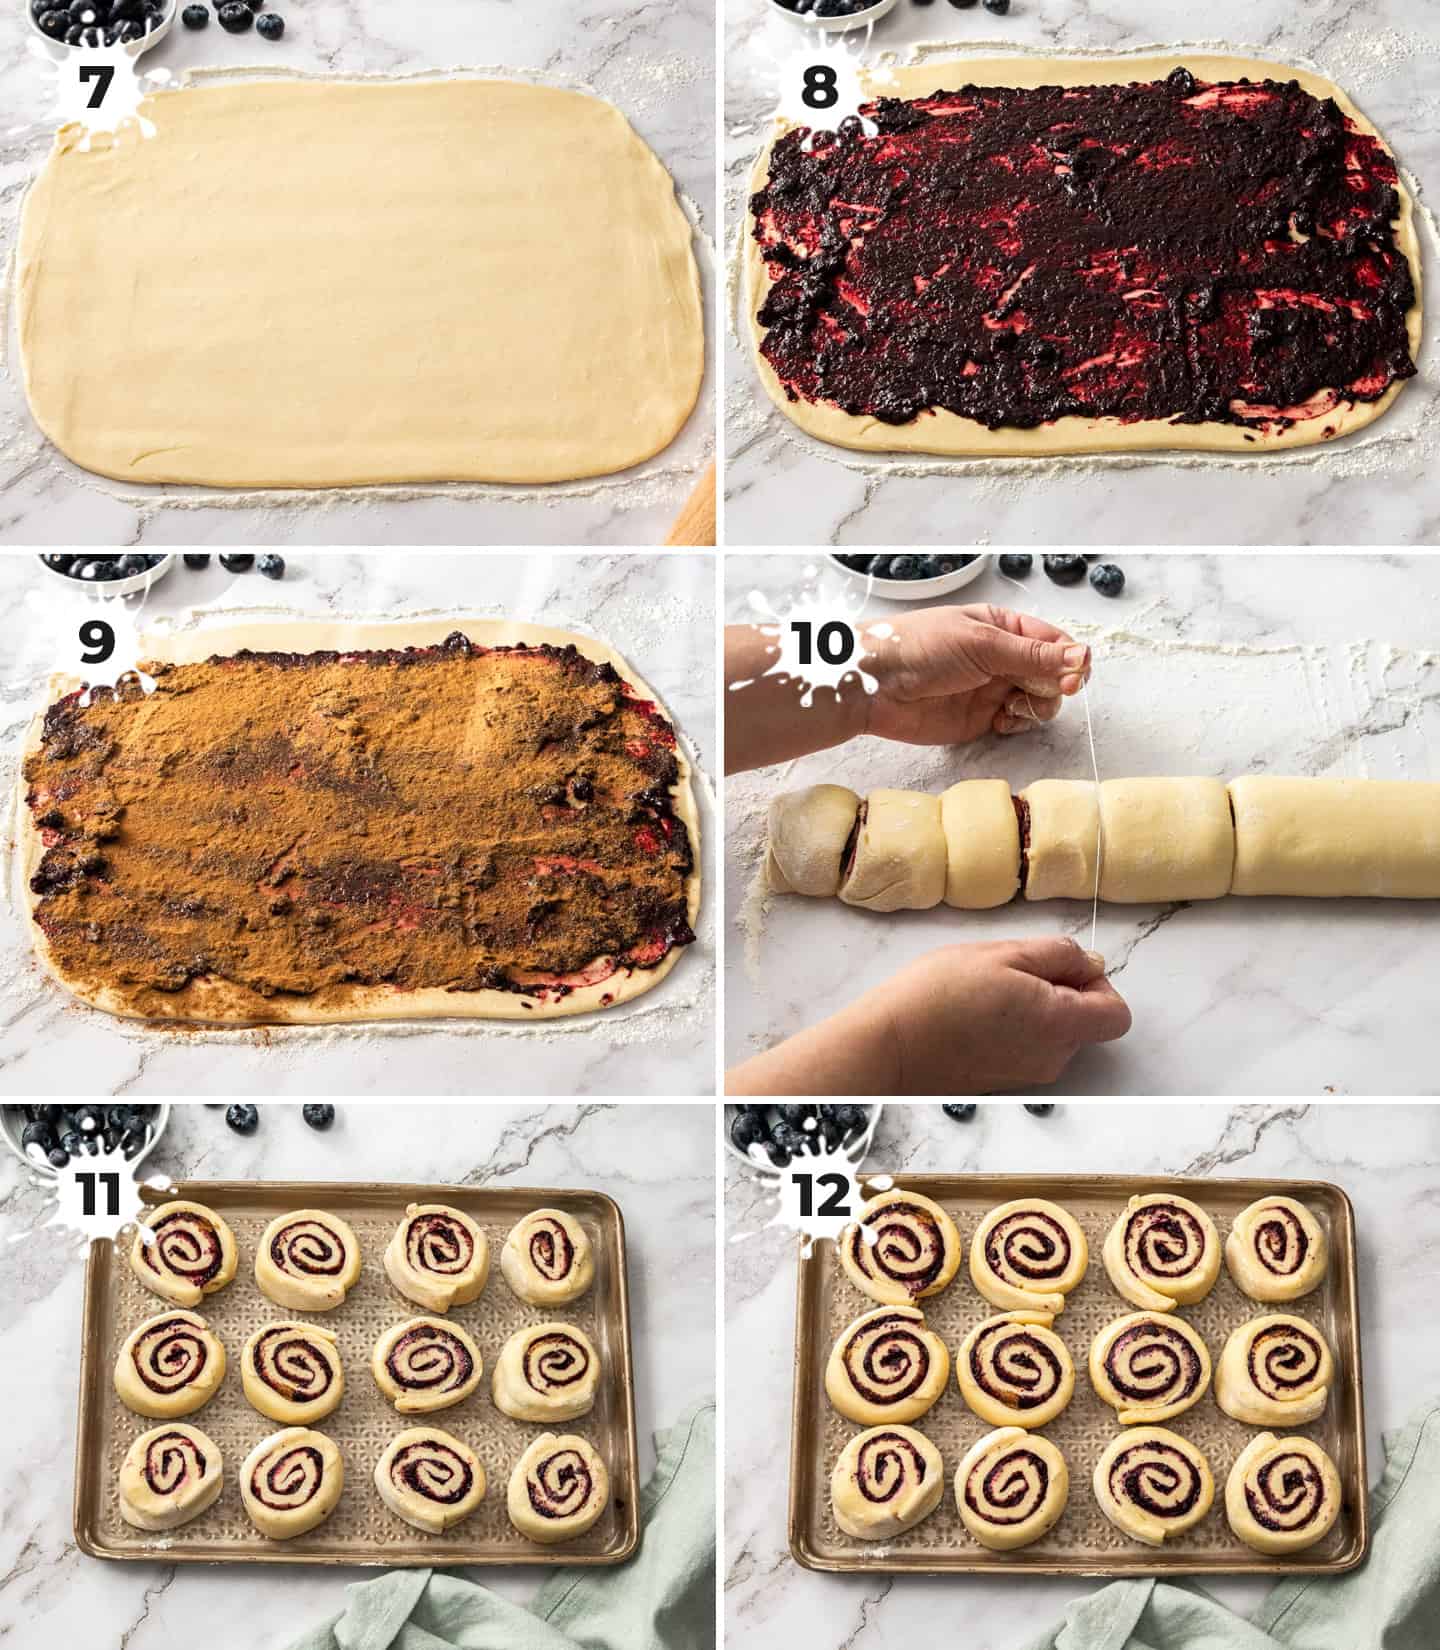 A collage of 6 images showing how to assemble and cut blueberry cinnamon rolls.